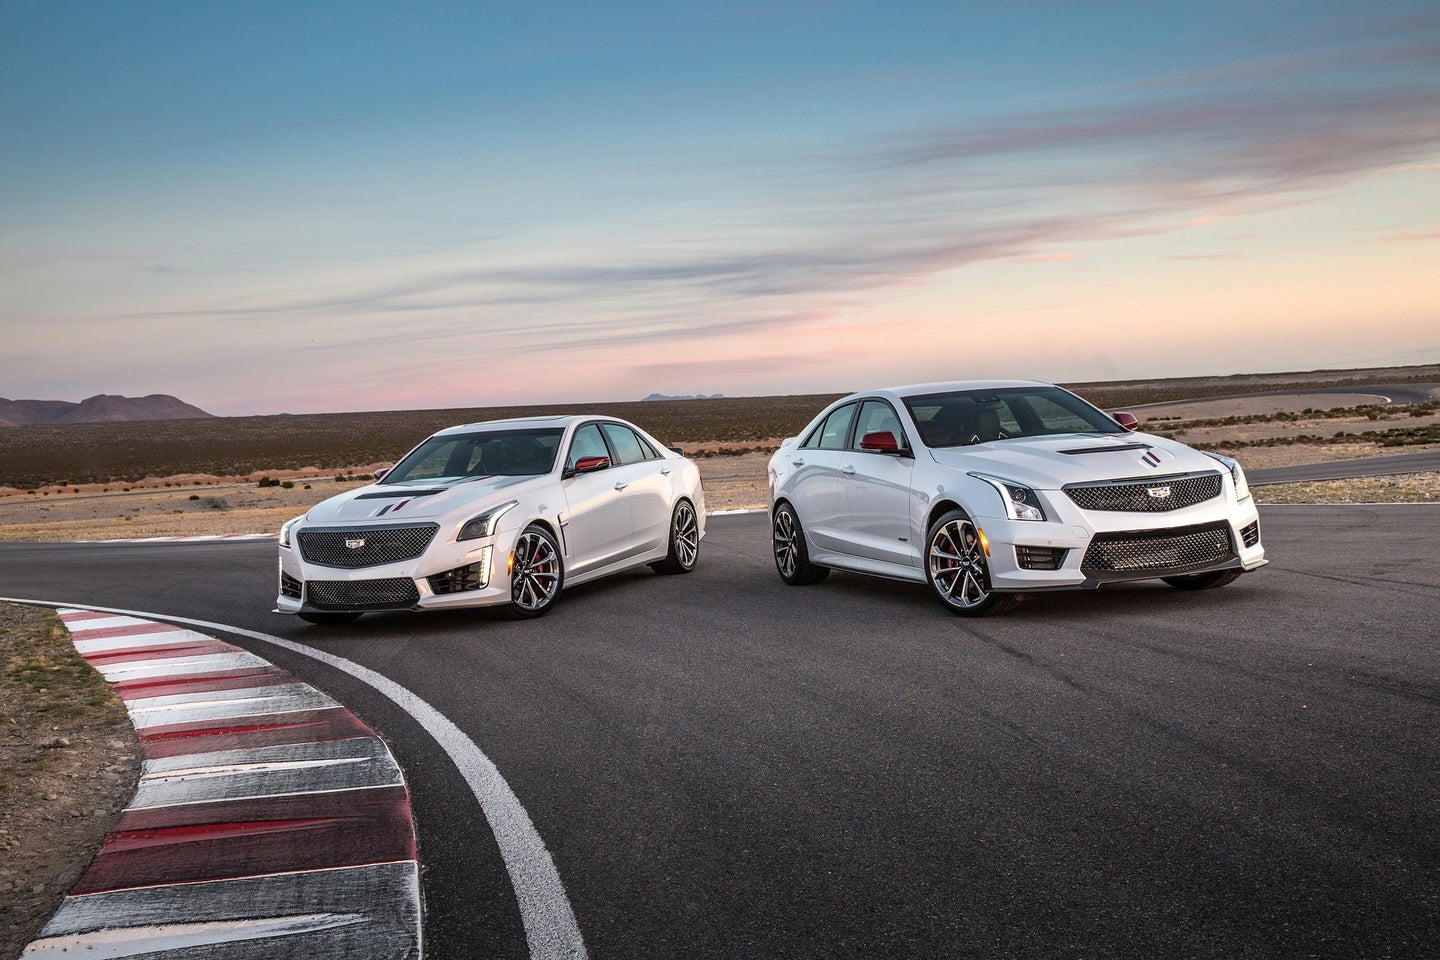 Book by Cadillac All-Inclusive Vehicle Subscription Service Gets Big Reboot